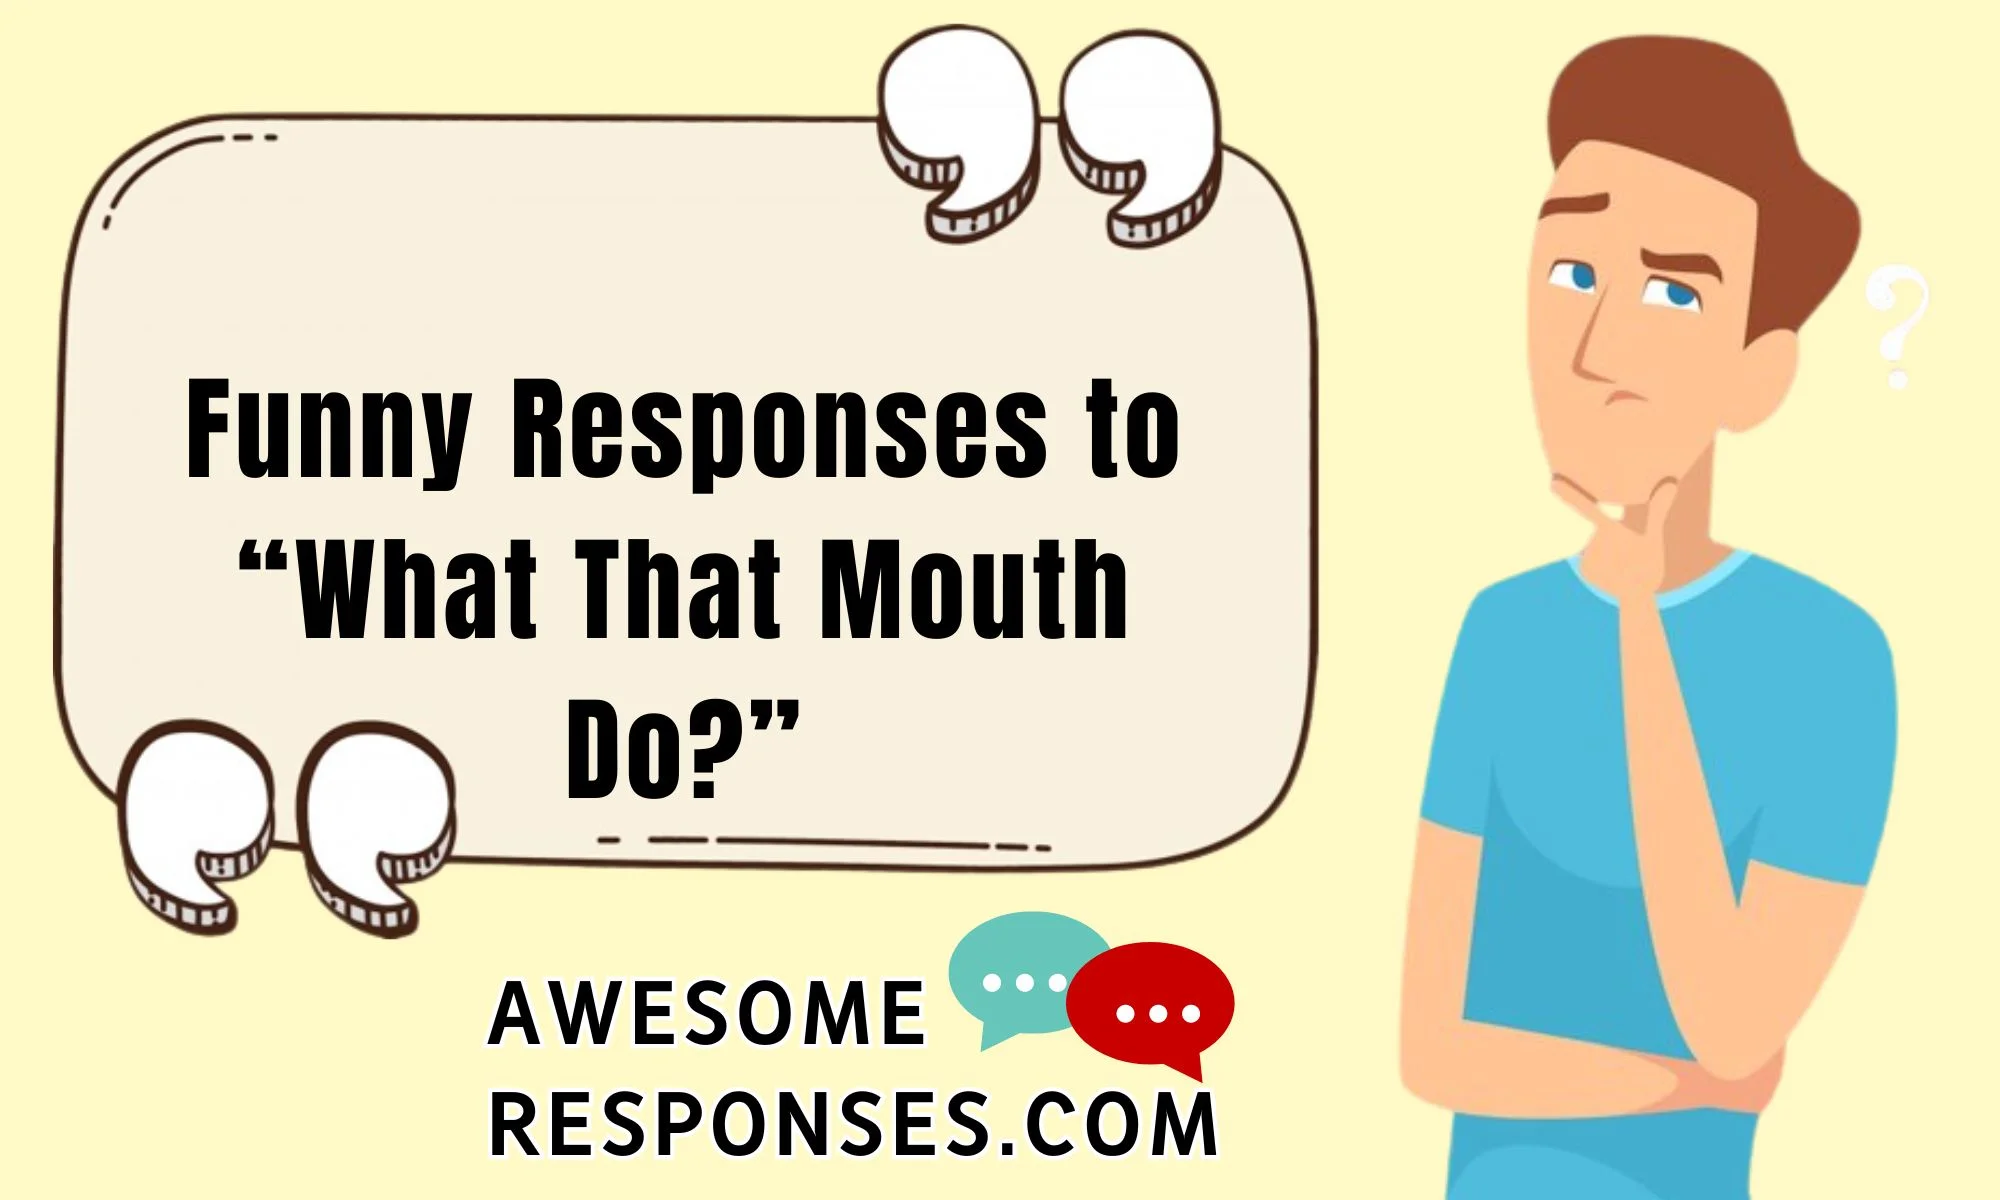 Funny Responses to “What That Mouth Do?”